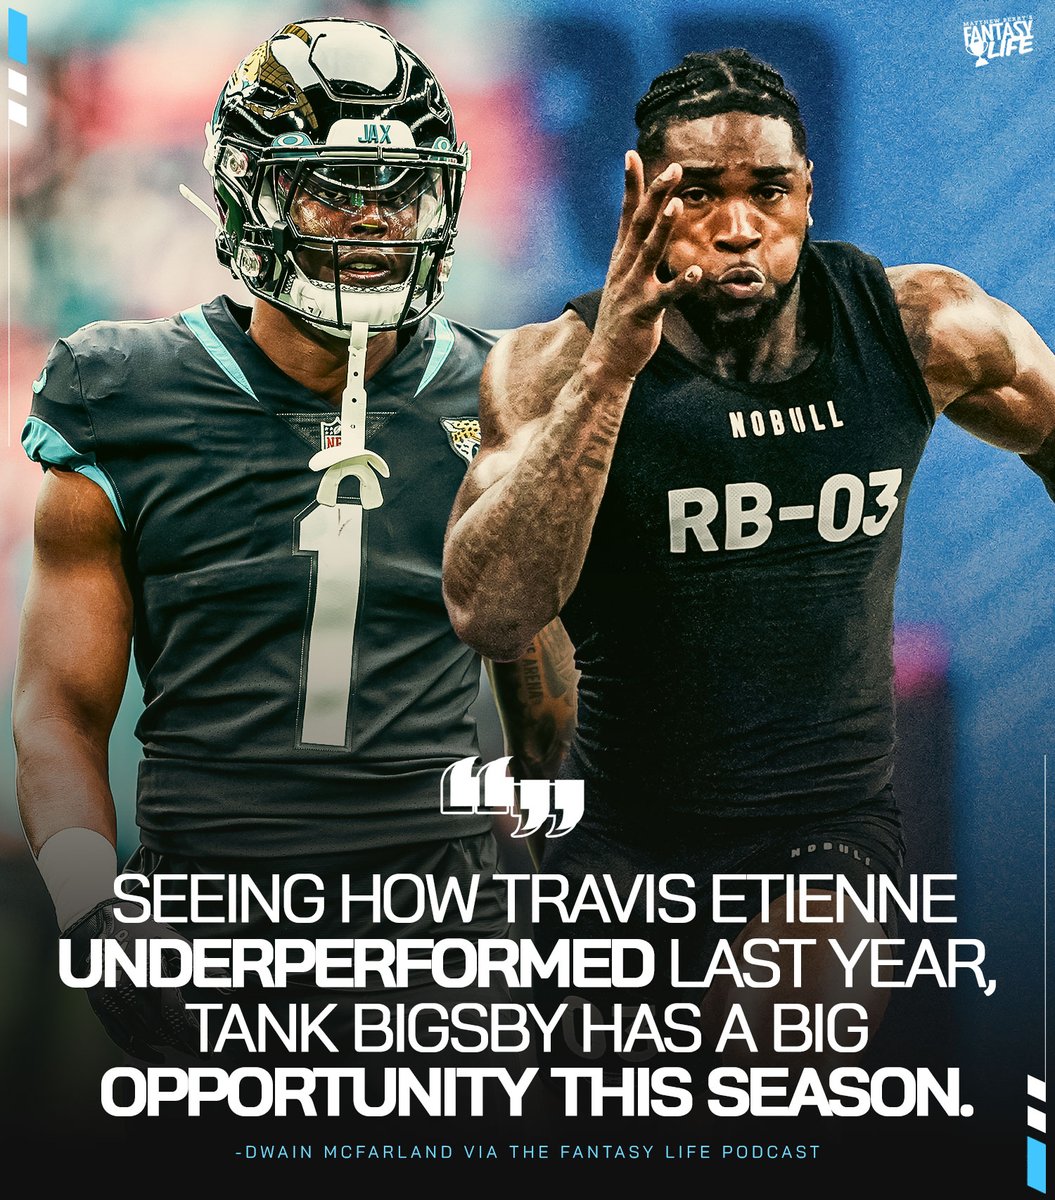 Tank Bigsby has a big opportunity with the Jaguars 🚀